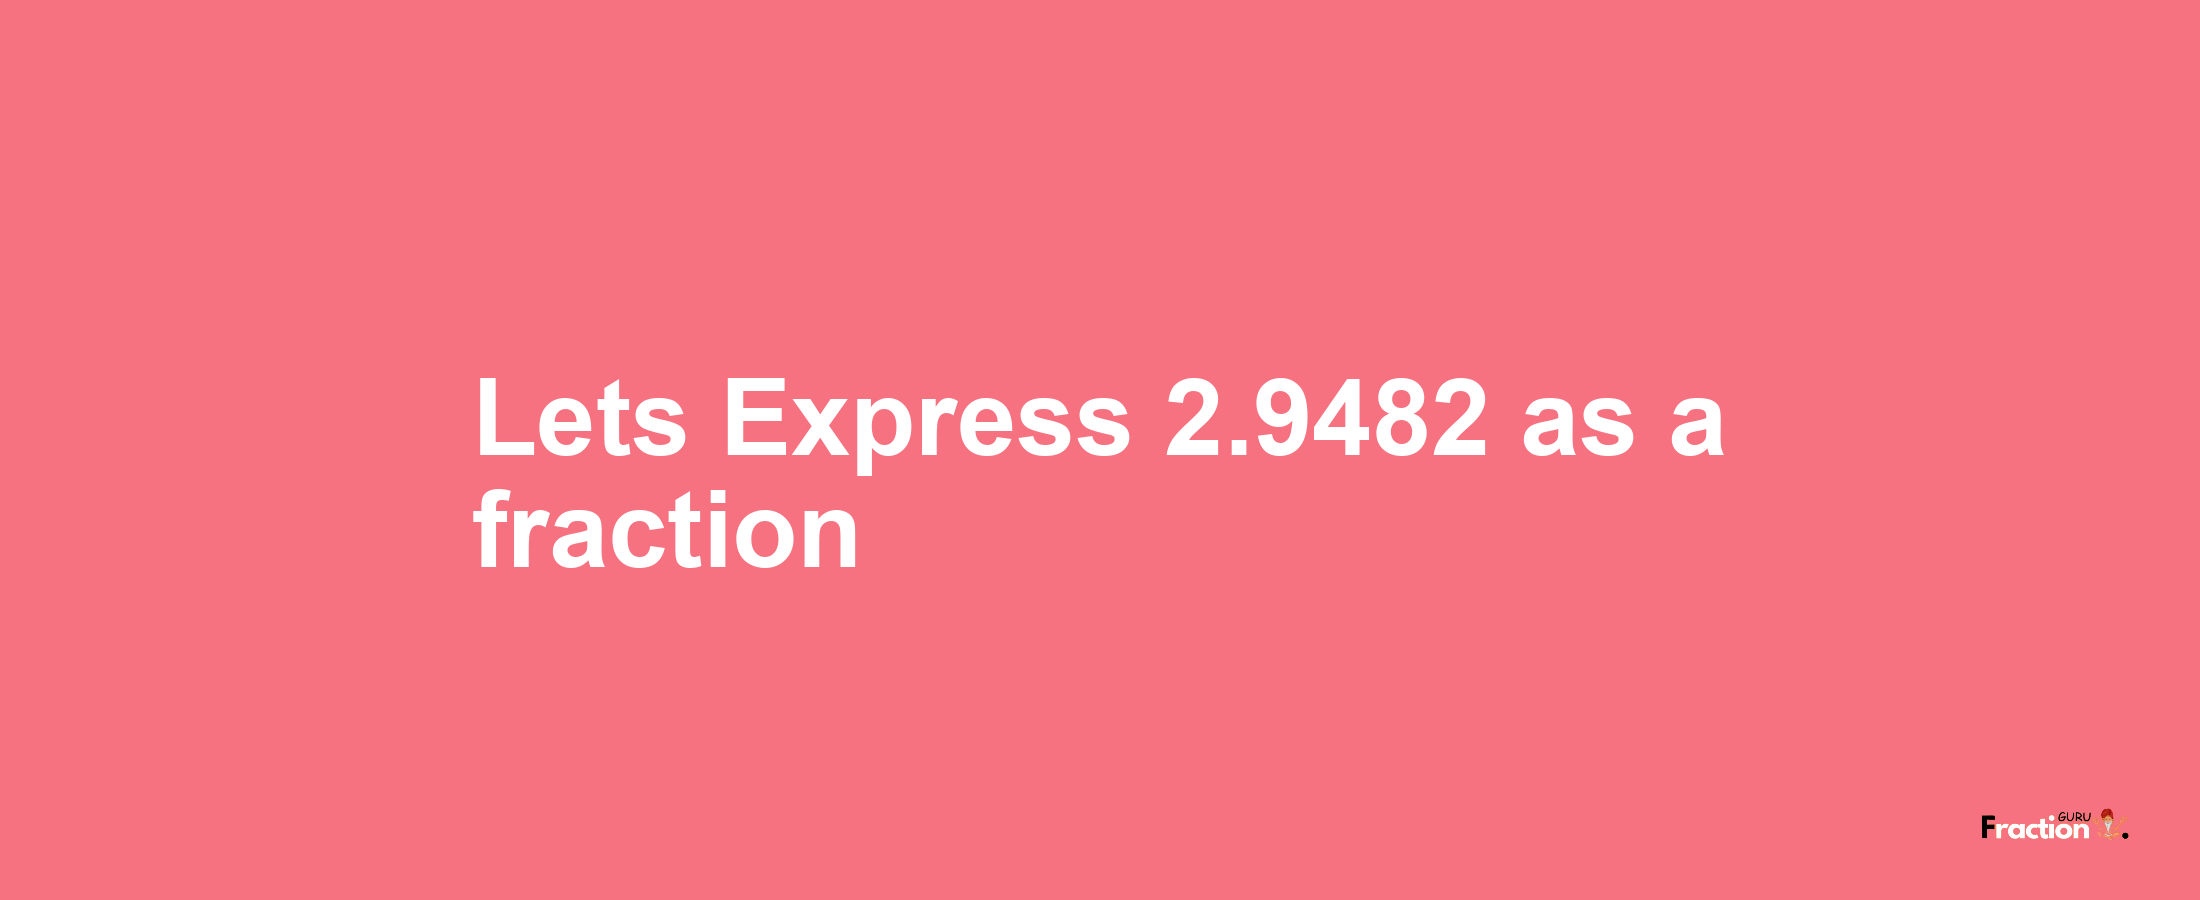 Lets Express 2.9482 as afraction